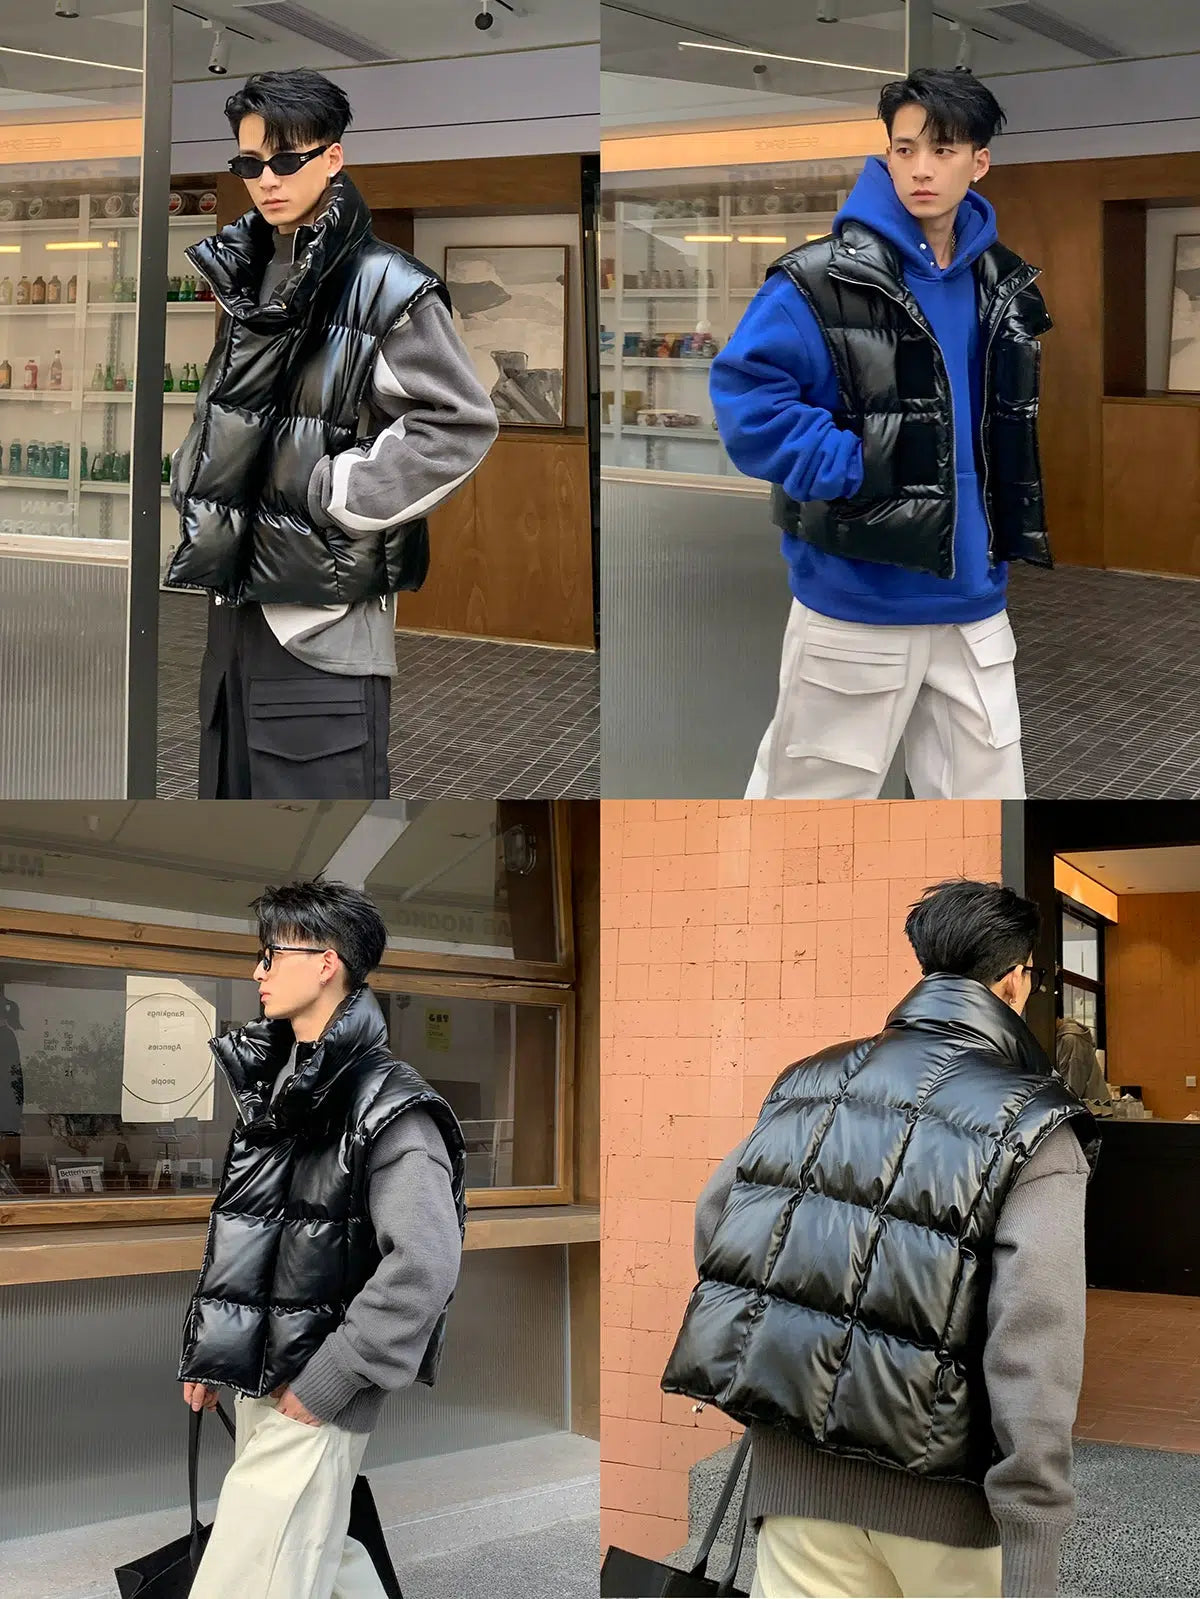 Quilted Puffer Vest Korean Street Fashion Vest By Poikilotherm Shop Online at OH Vault